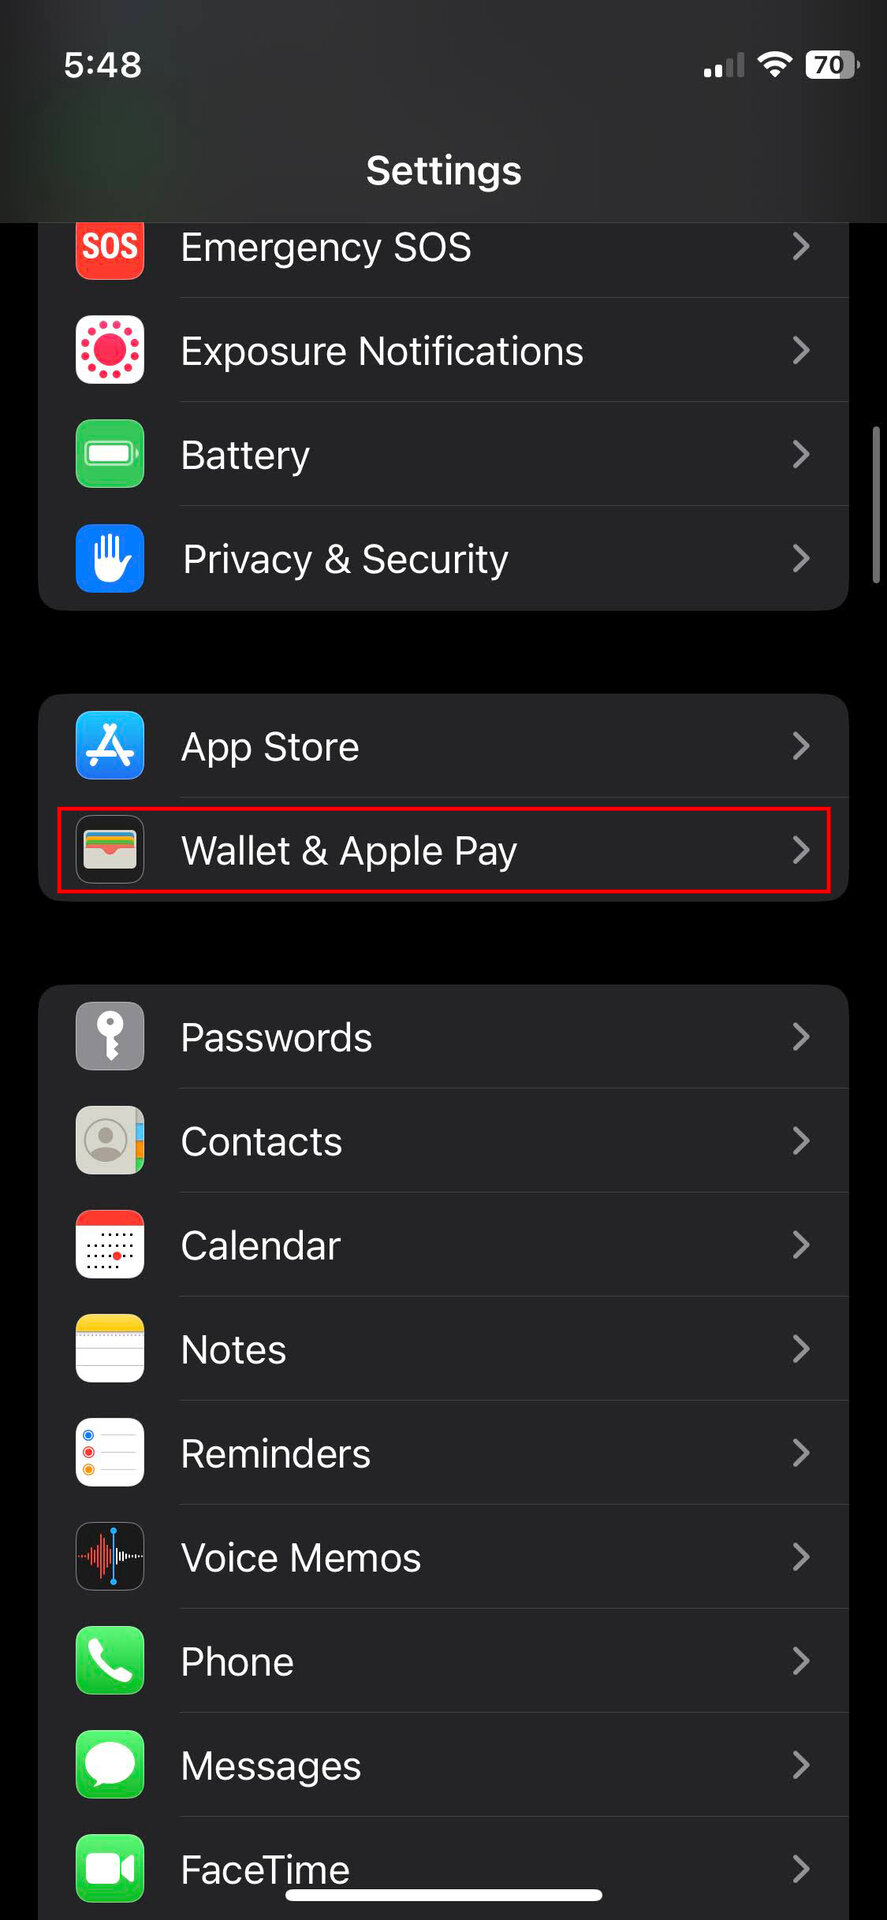 Update your Apple Pay address on iPhone 1